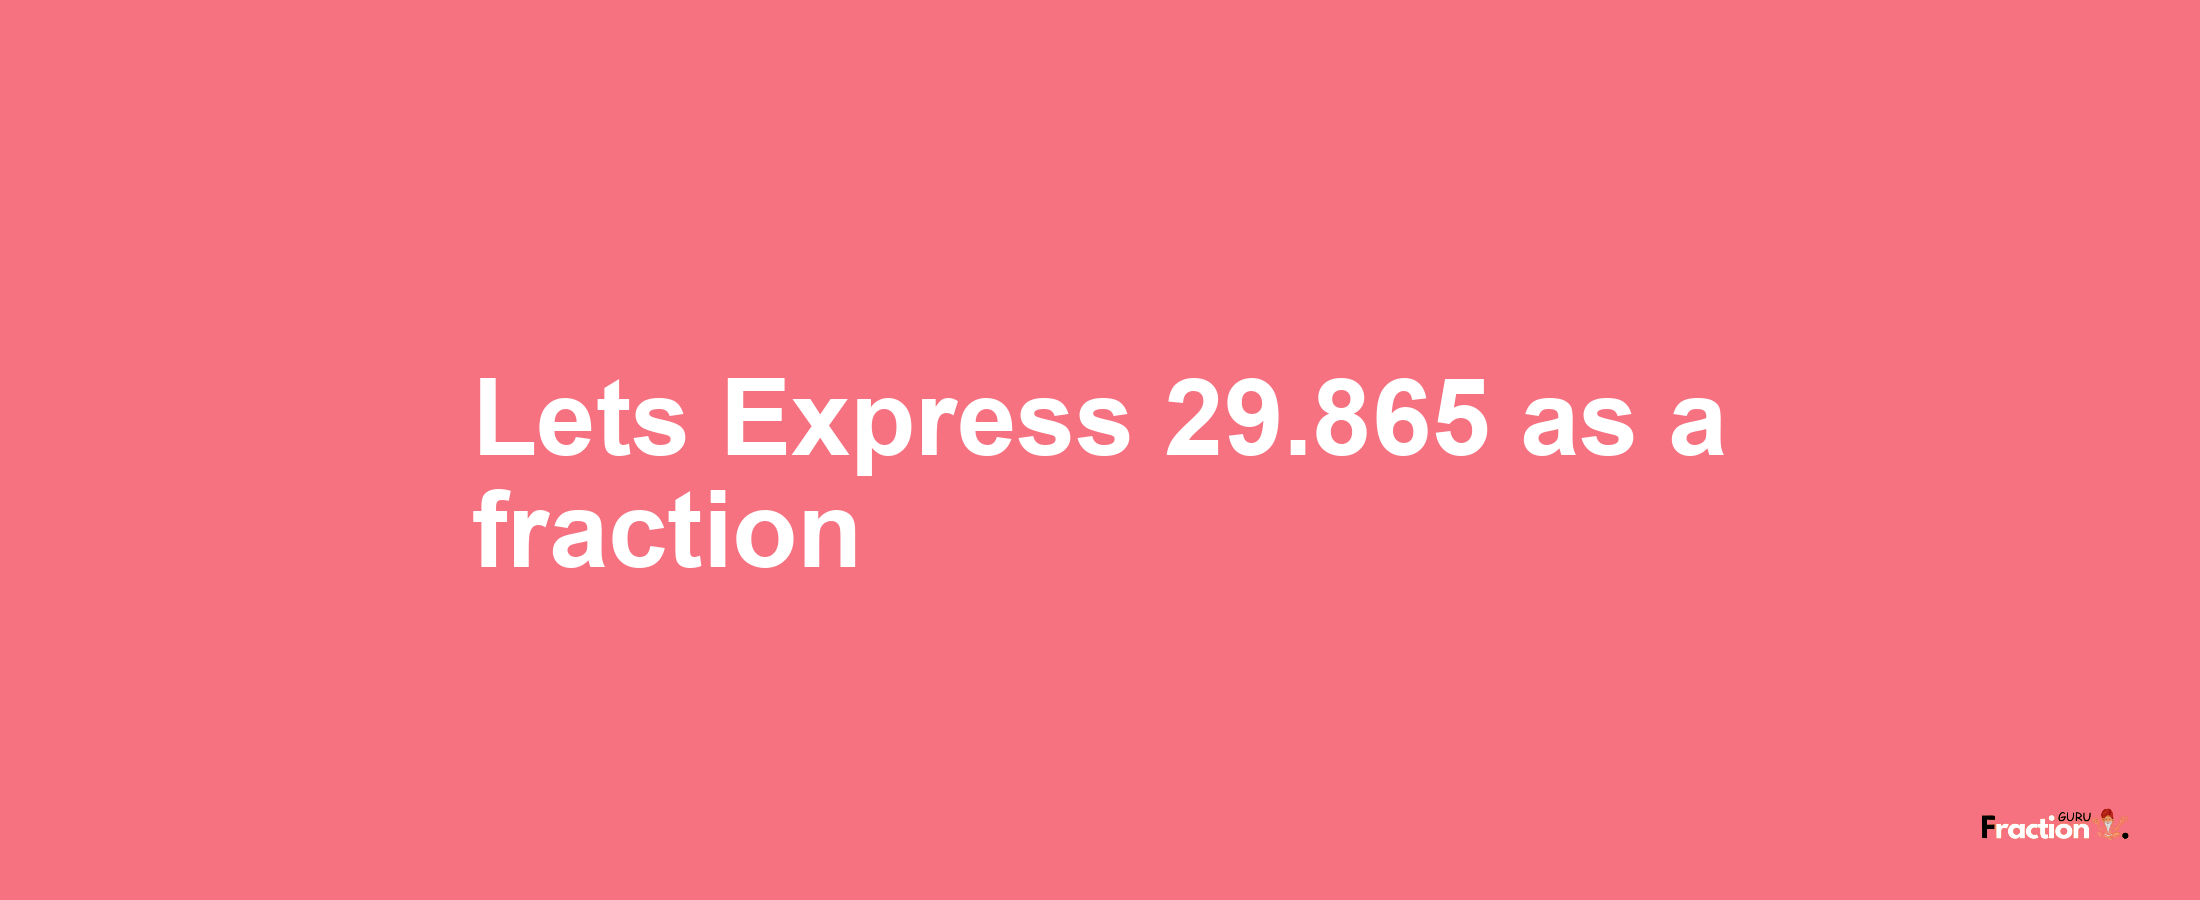 Lets Express 29.865 as afraction